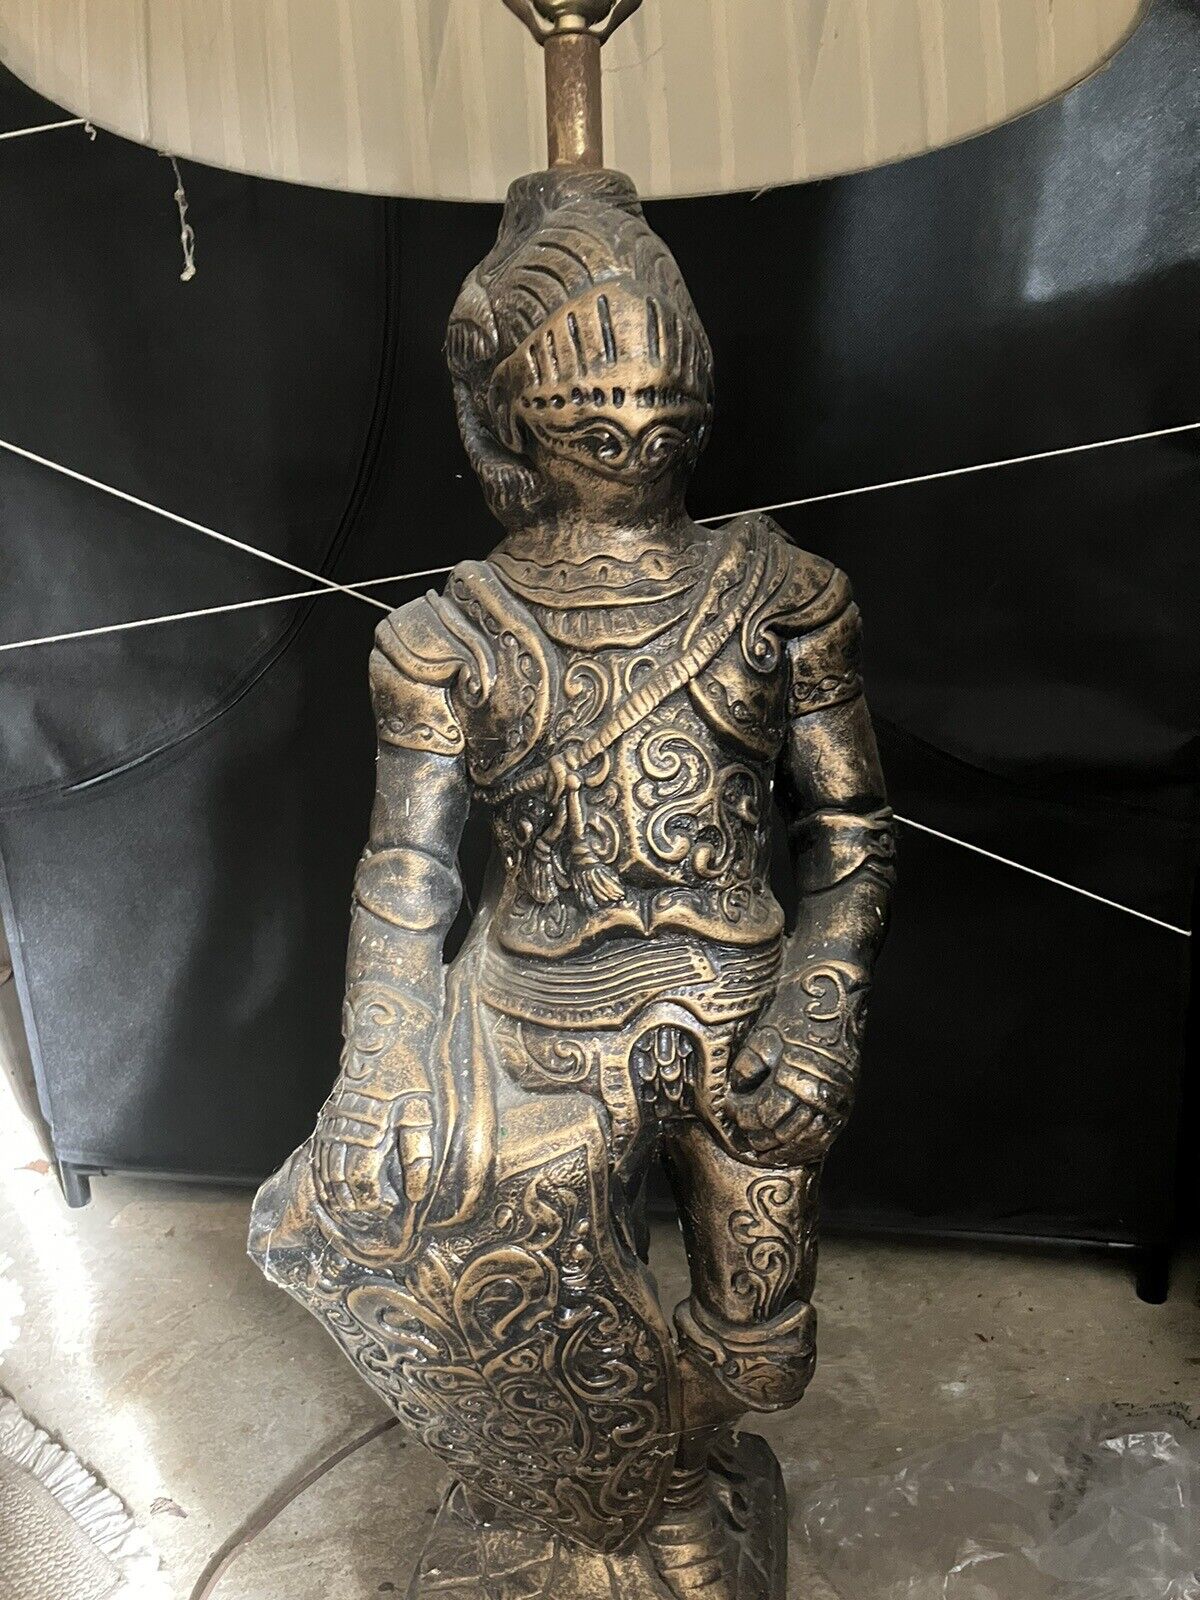 Medieval knight lamp  39 inches tall, antique bronze